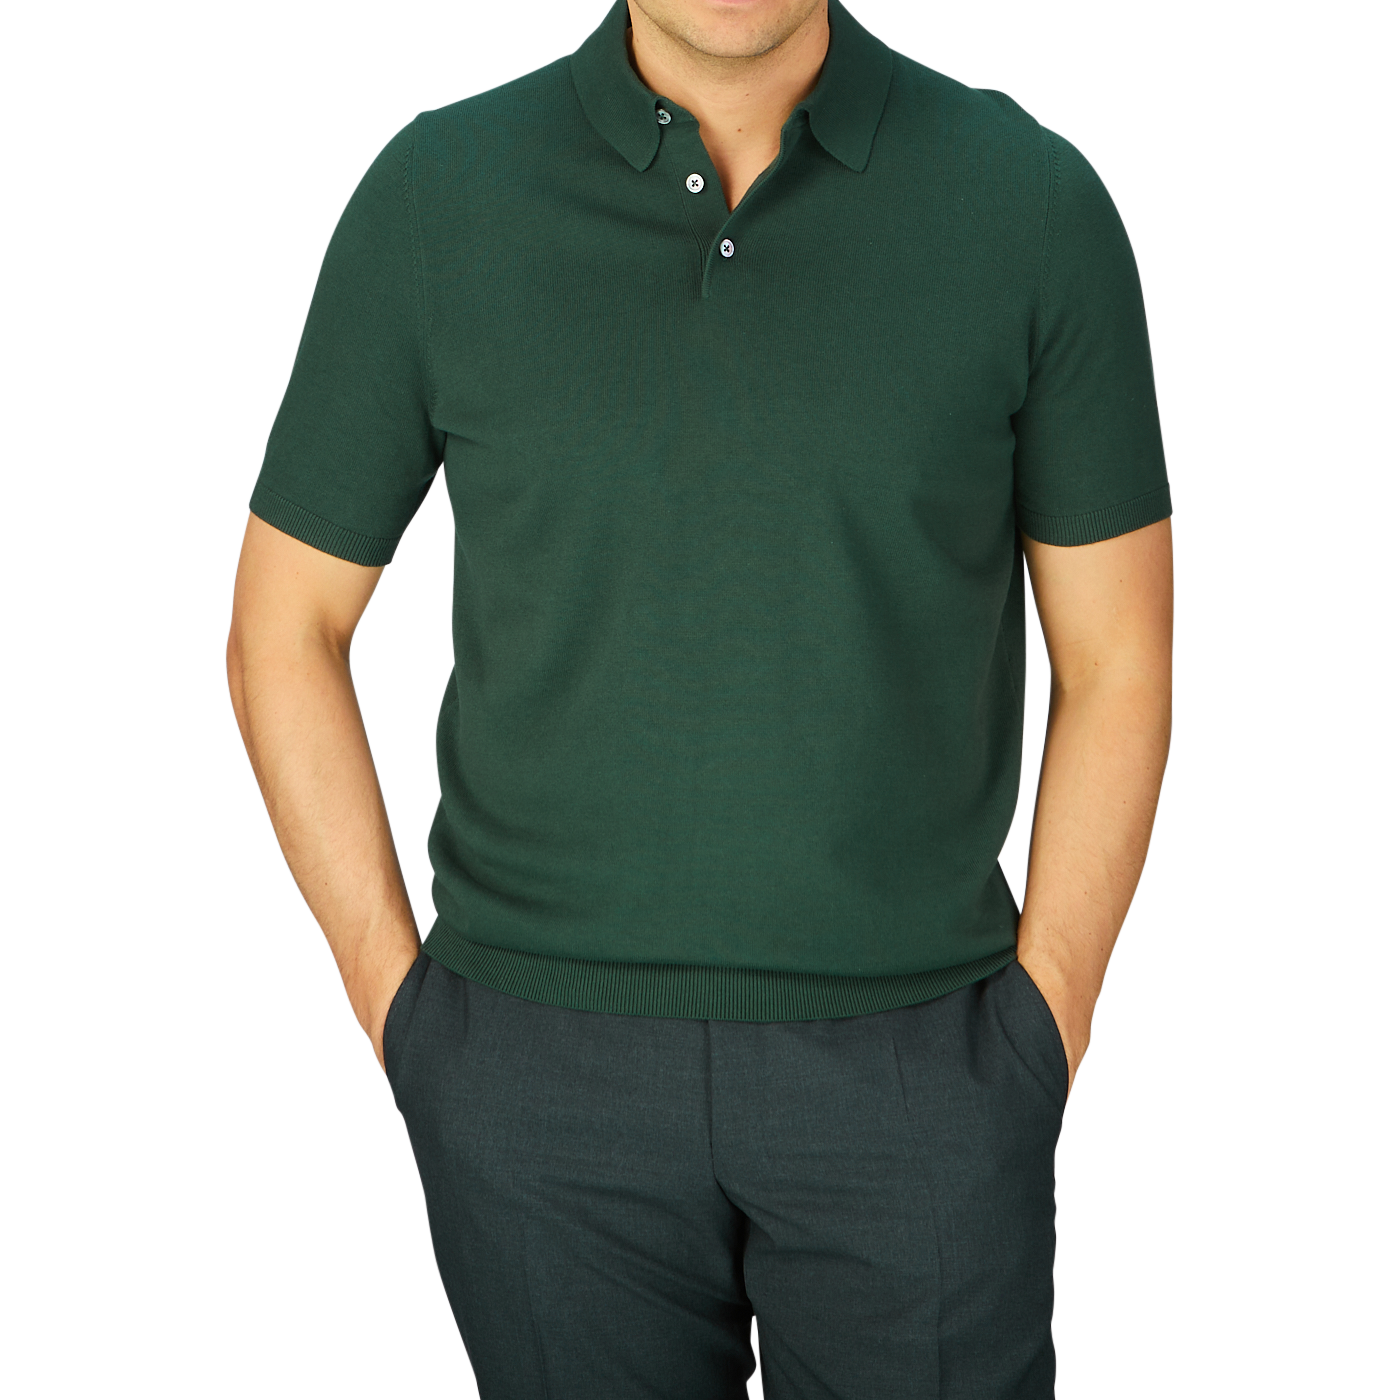 Man in a Alan Paine Racing Green Knitted Cotton Polo Shirt and dark trousers against a blue background.